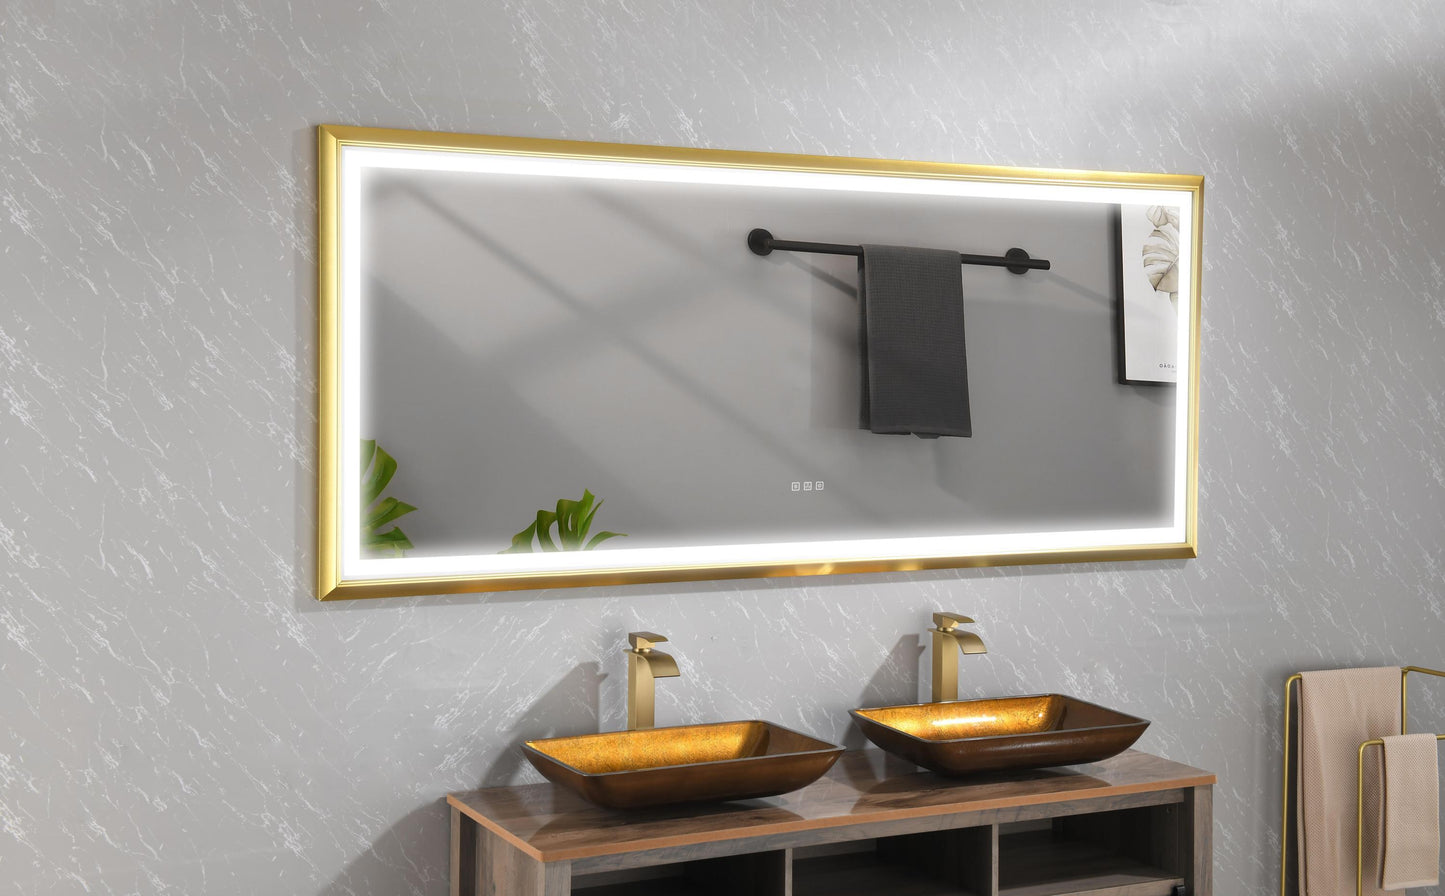 LTL needs to consult the warehouse address84in. W x 34 in. H Oversized Rectangular Brushed gold Framed LED Mirror Anti-Fog Dimmable Wall Mount Bathroom Vanity Mirror 
 HD Wall Mirror